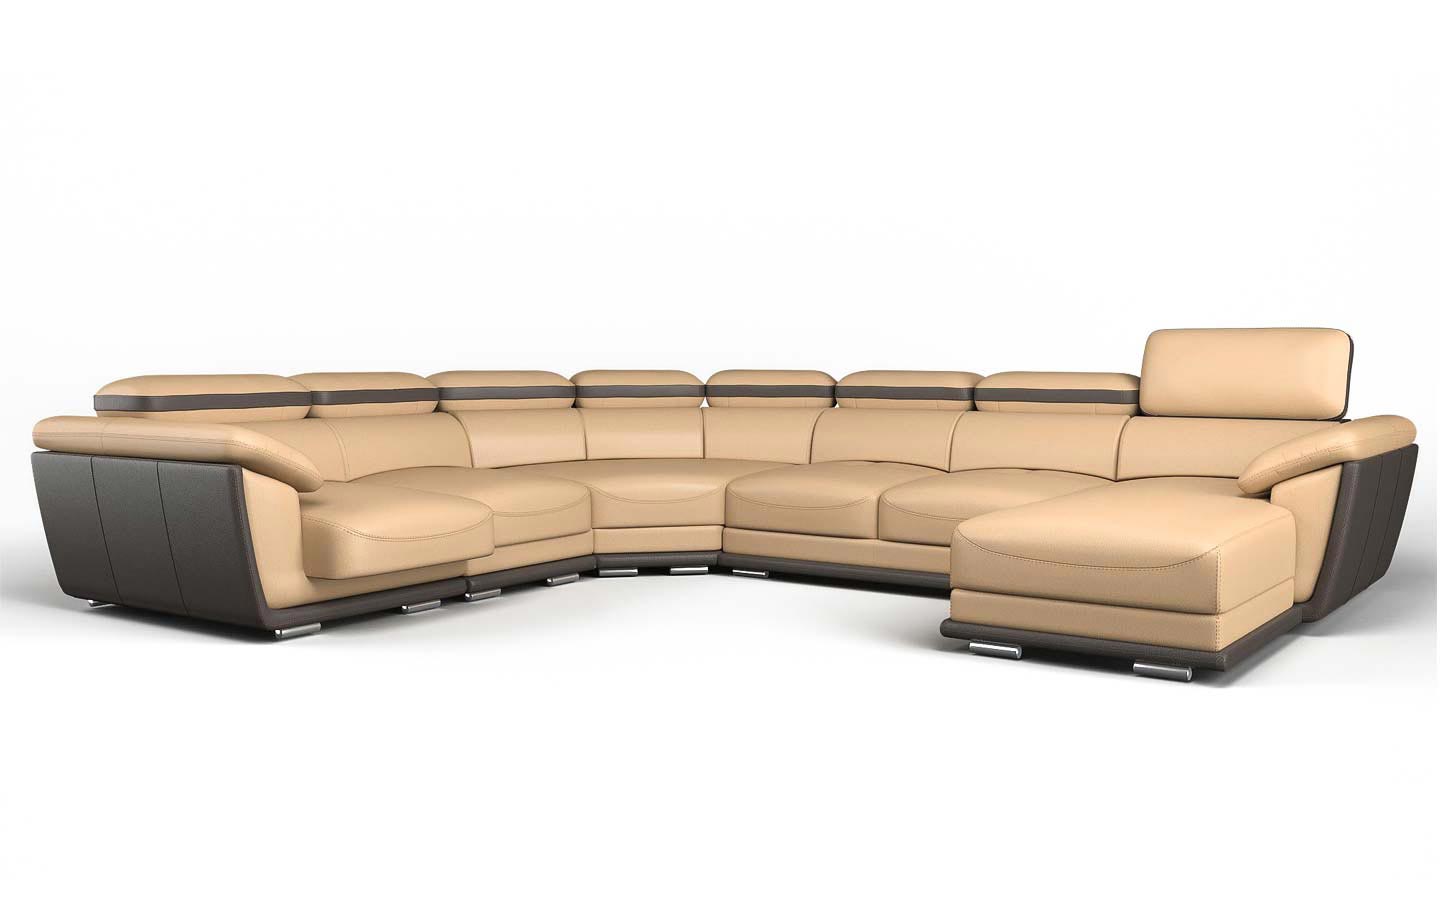 3D product rendering of luxury cream leather sofa